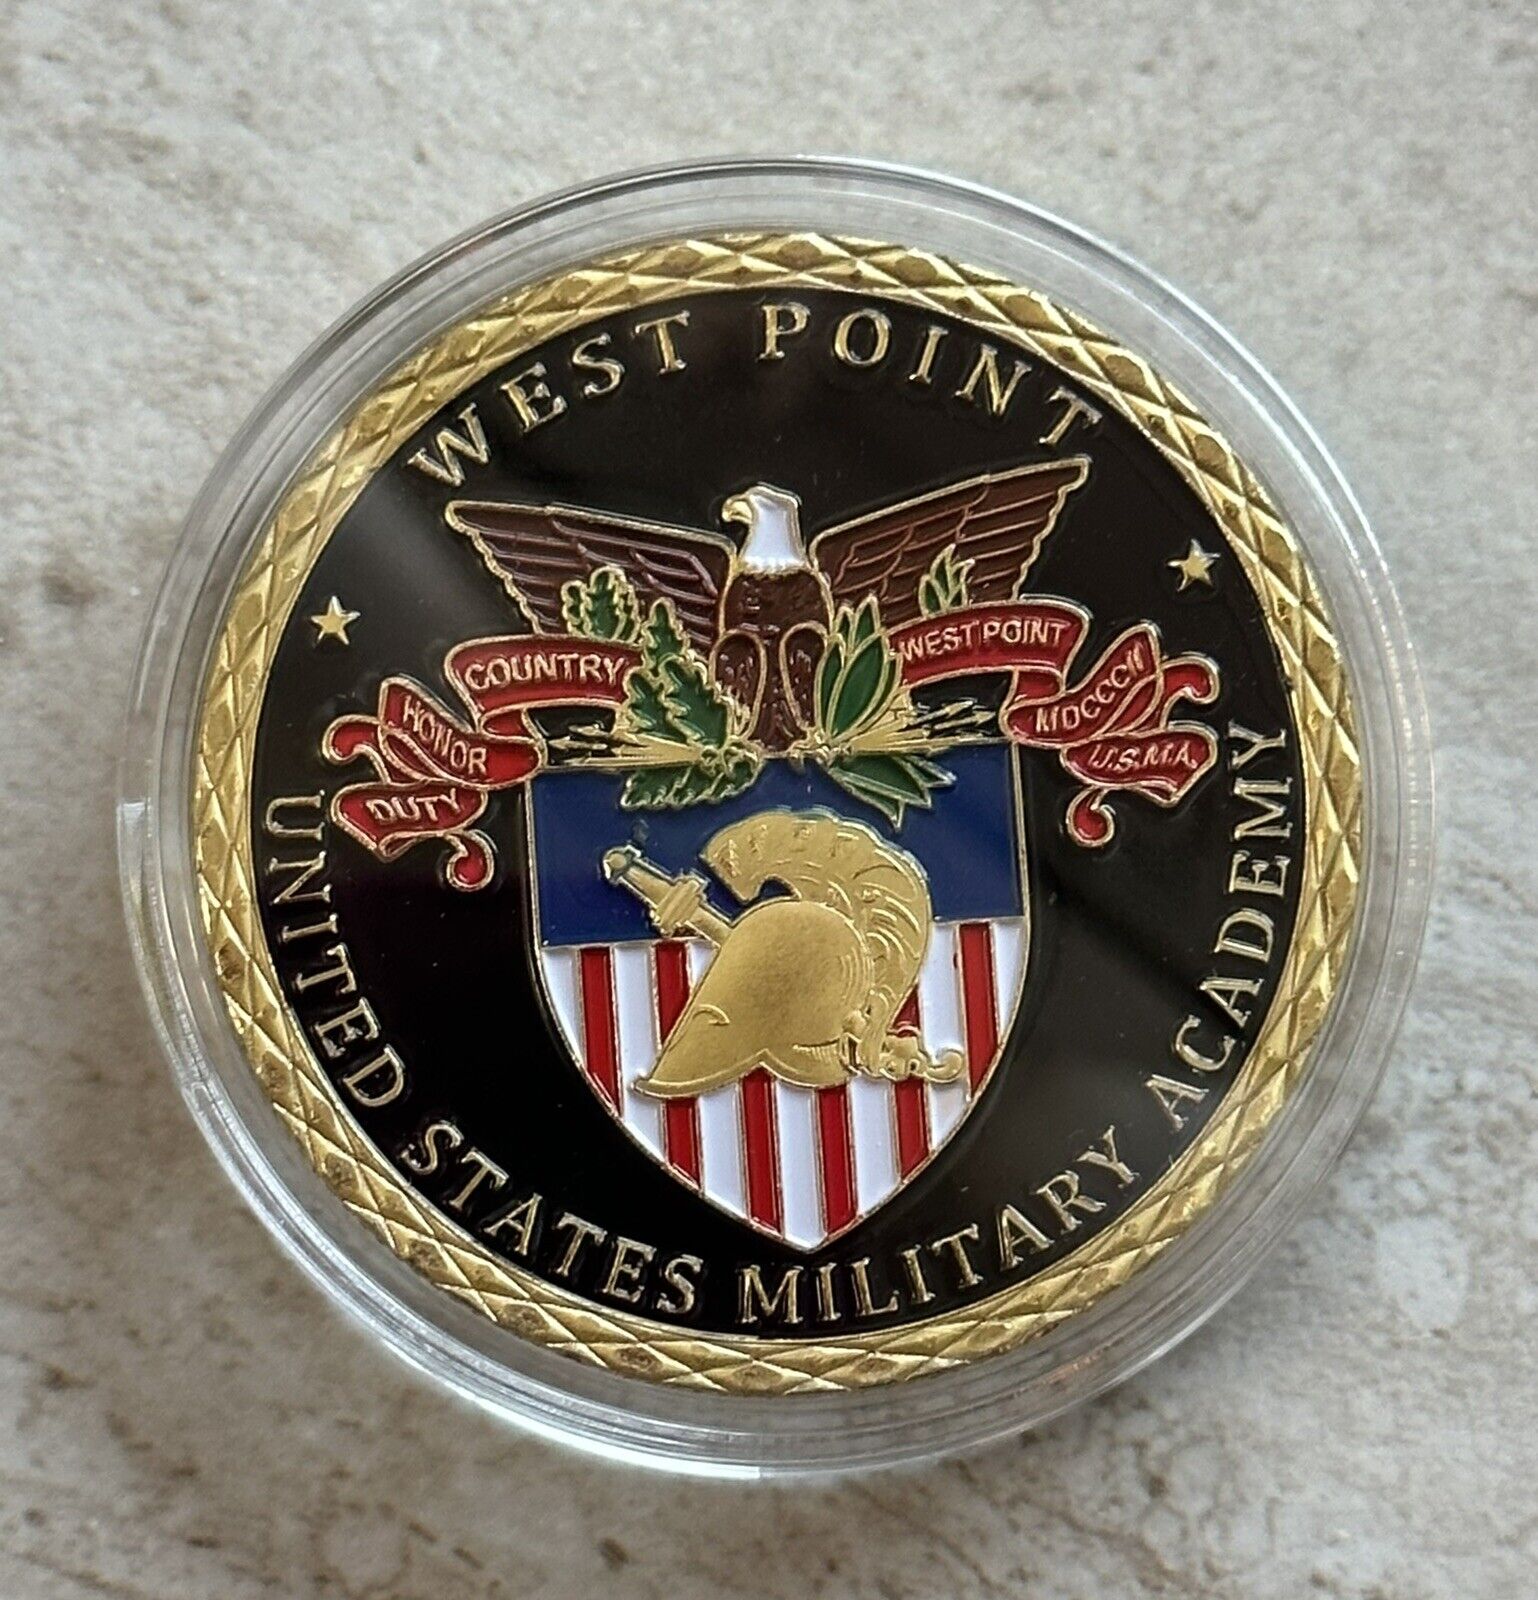 Challenge Coin West Point Duty Honor Country Coin. New Great Gift